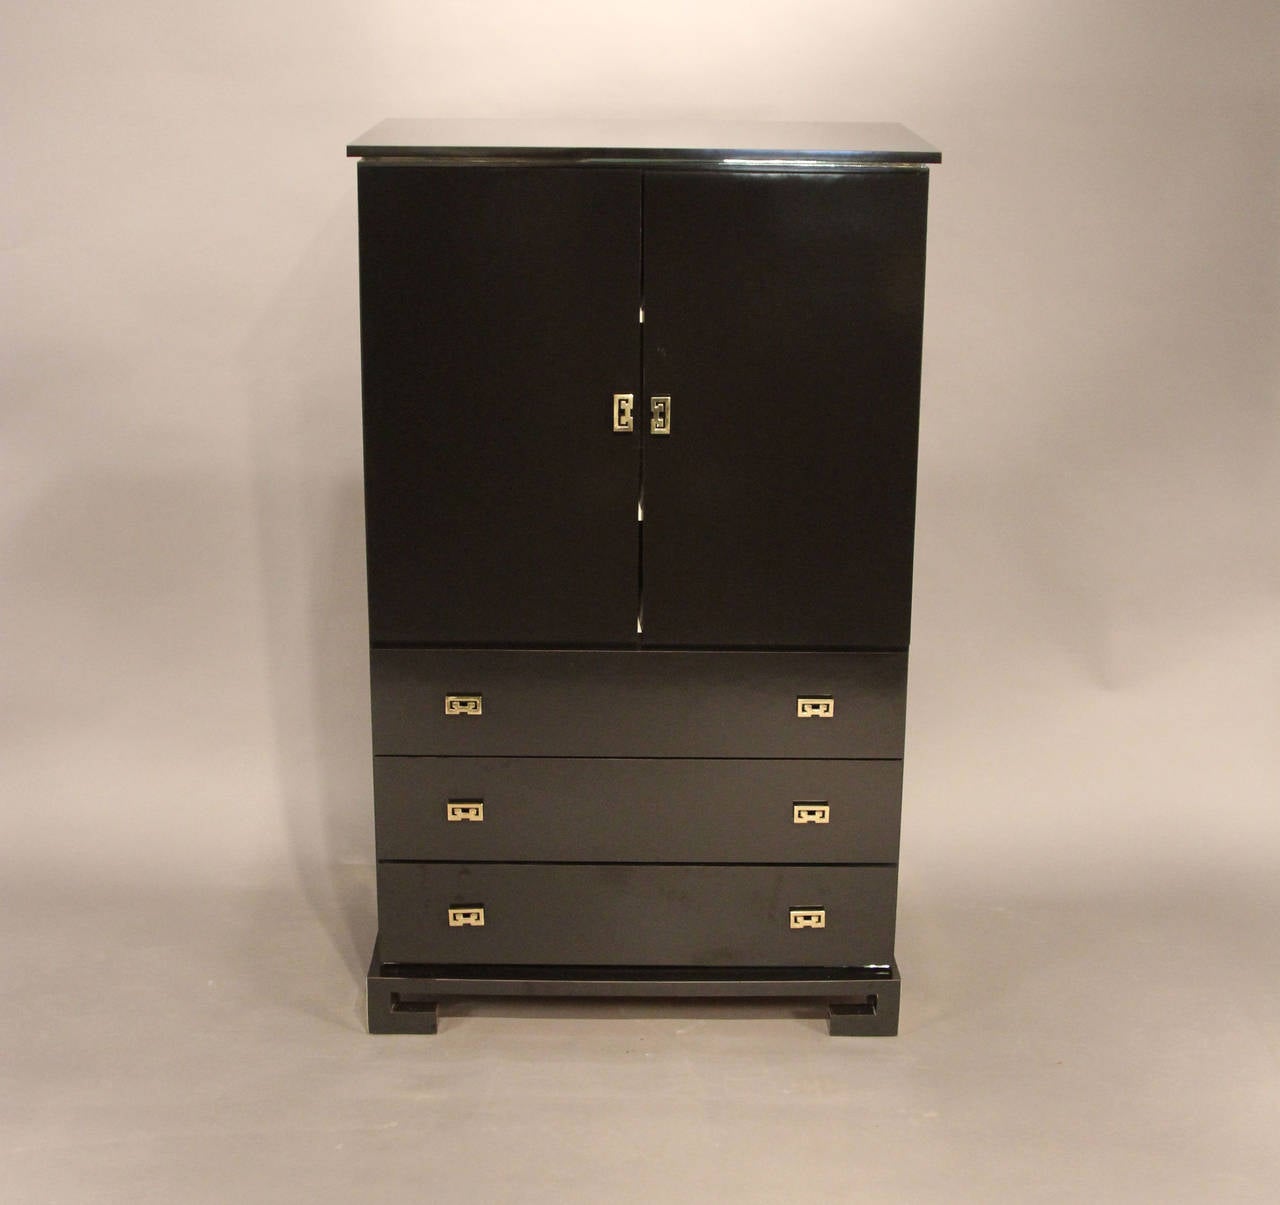 Stunning black lacquered cabinet serves as an armoire, dry bar, storage cabinet for linens or clothing too many uses to mention. Doors open to reveal divided interior sections with adjustable shelving. Cabinet also has three roomy drawers, all